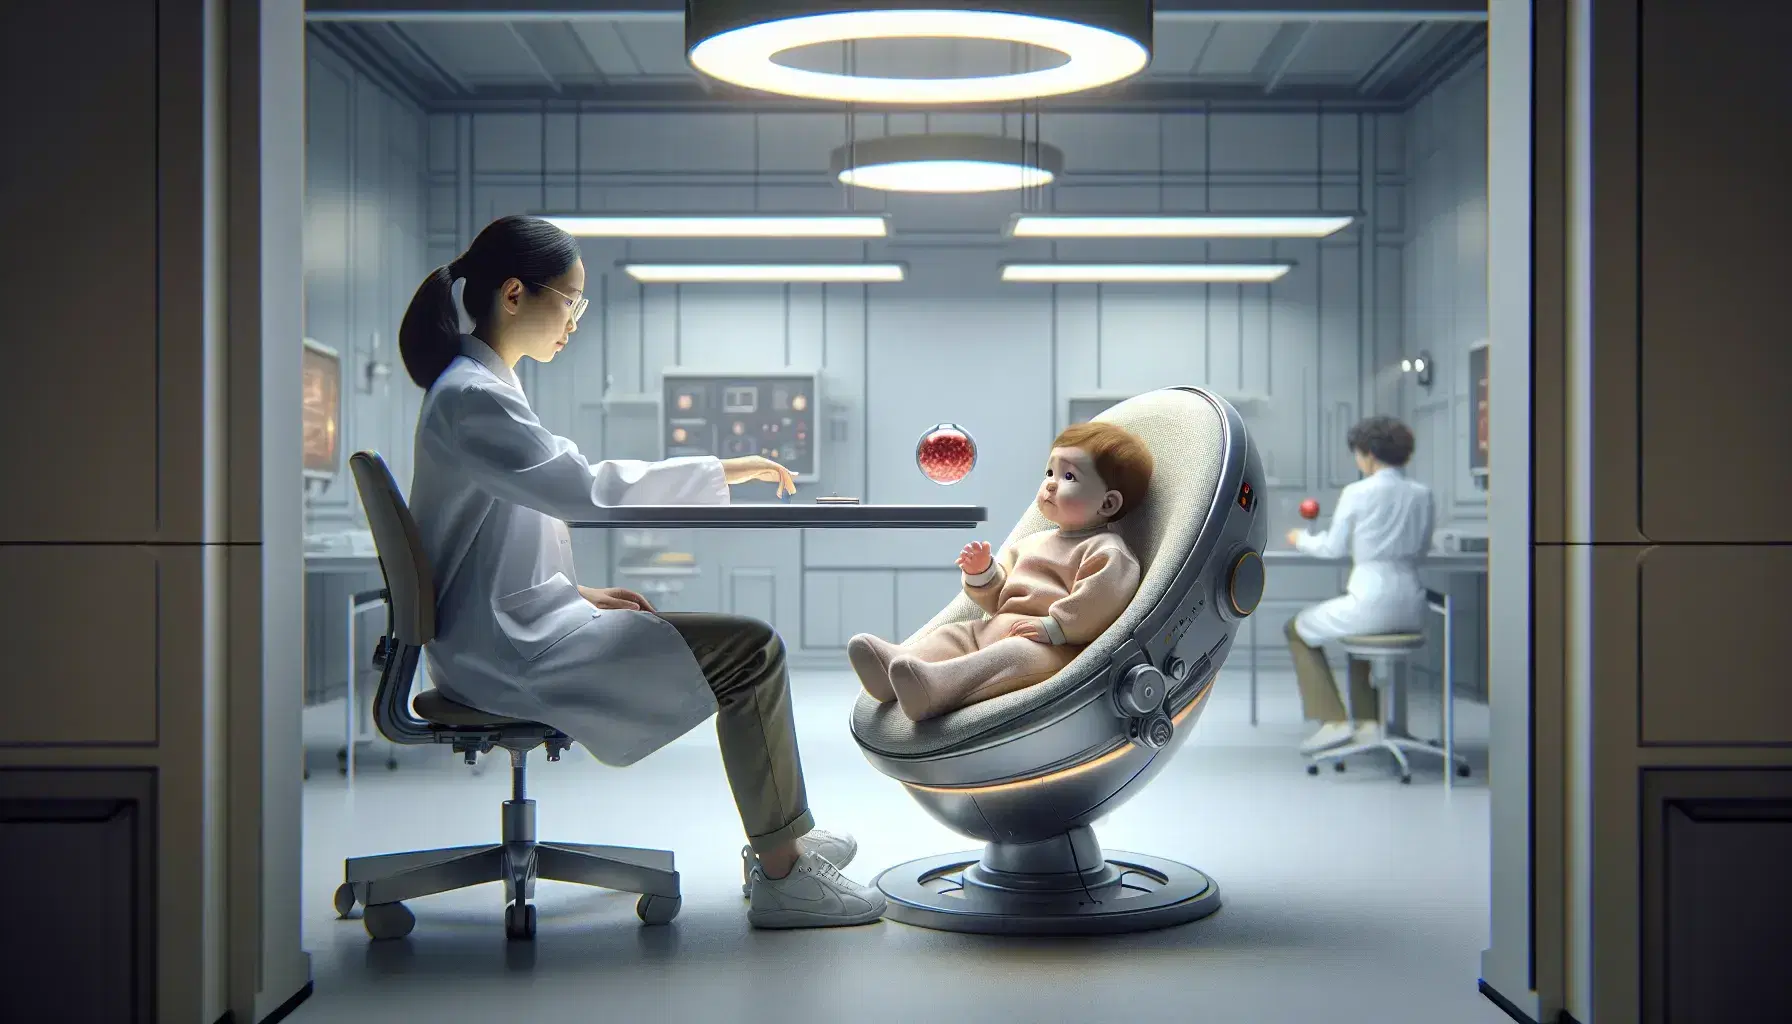 Peaceful science laboratory with light brown-haired baby reaching for a red ball, observed by an Asian researcher.